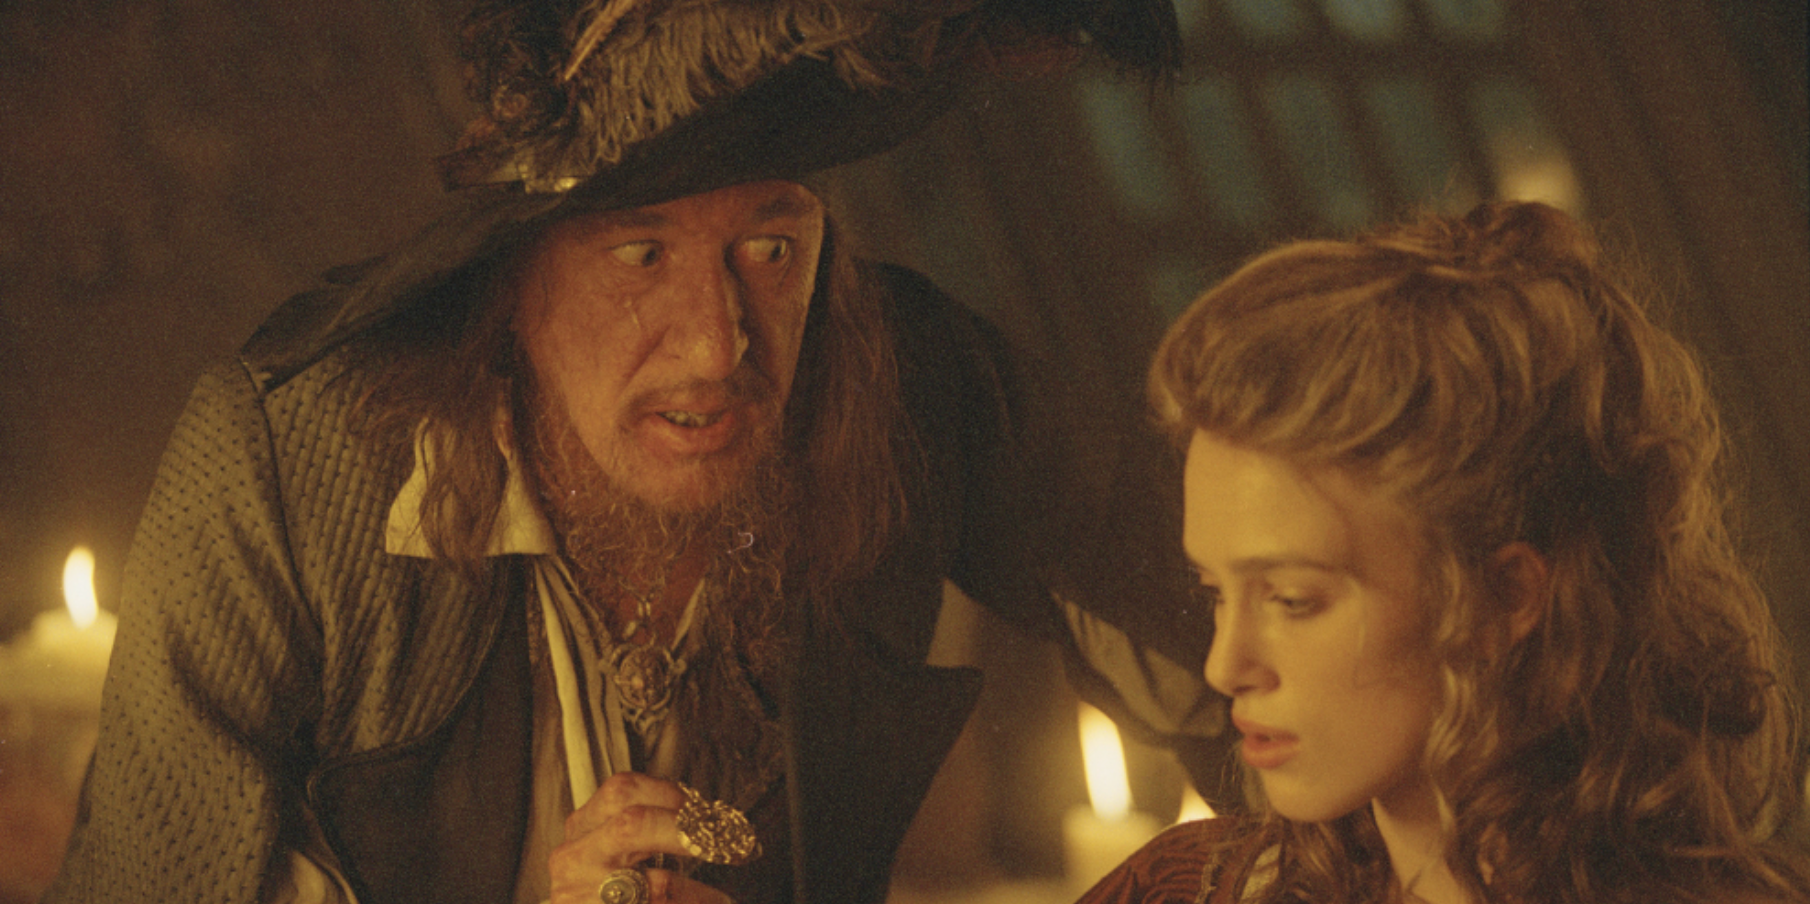 Hector Barbossa tells Elizabeth Swann of his curse Pirates of the Caribbean movie